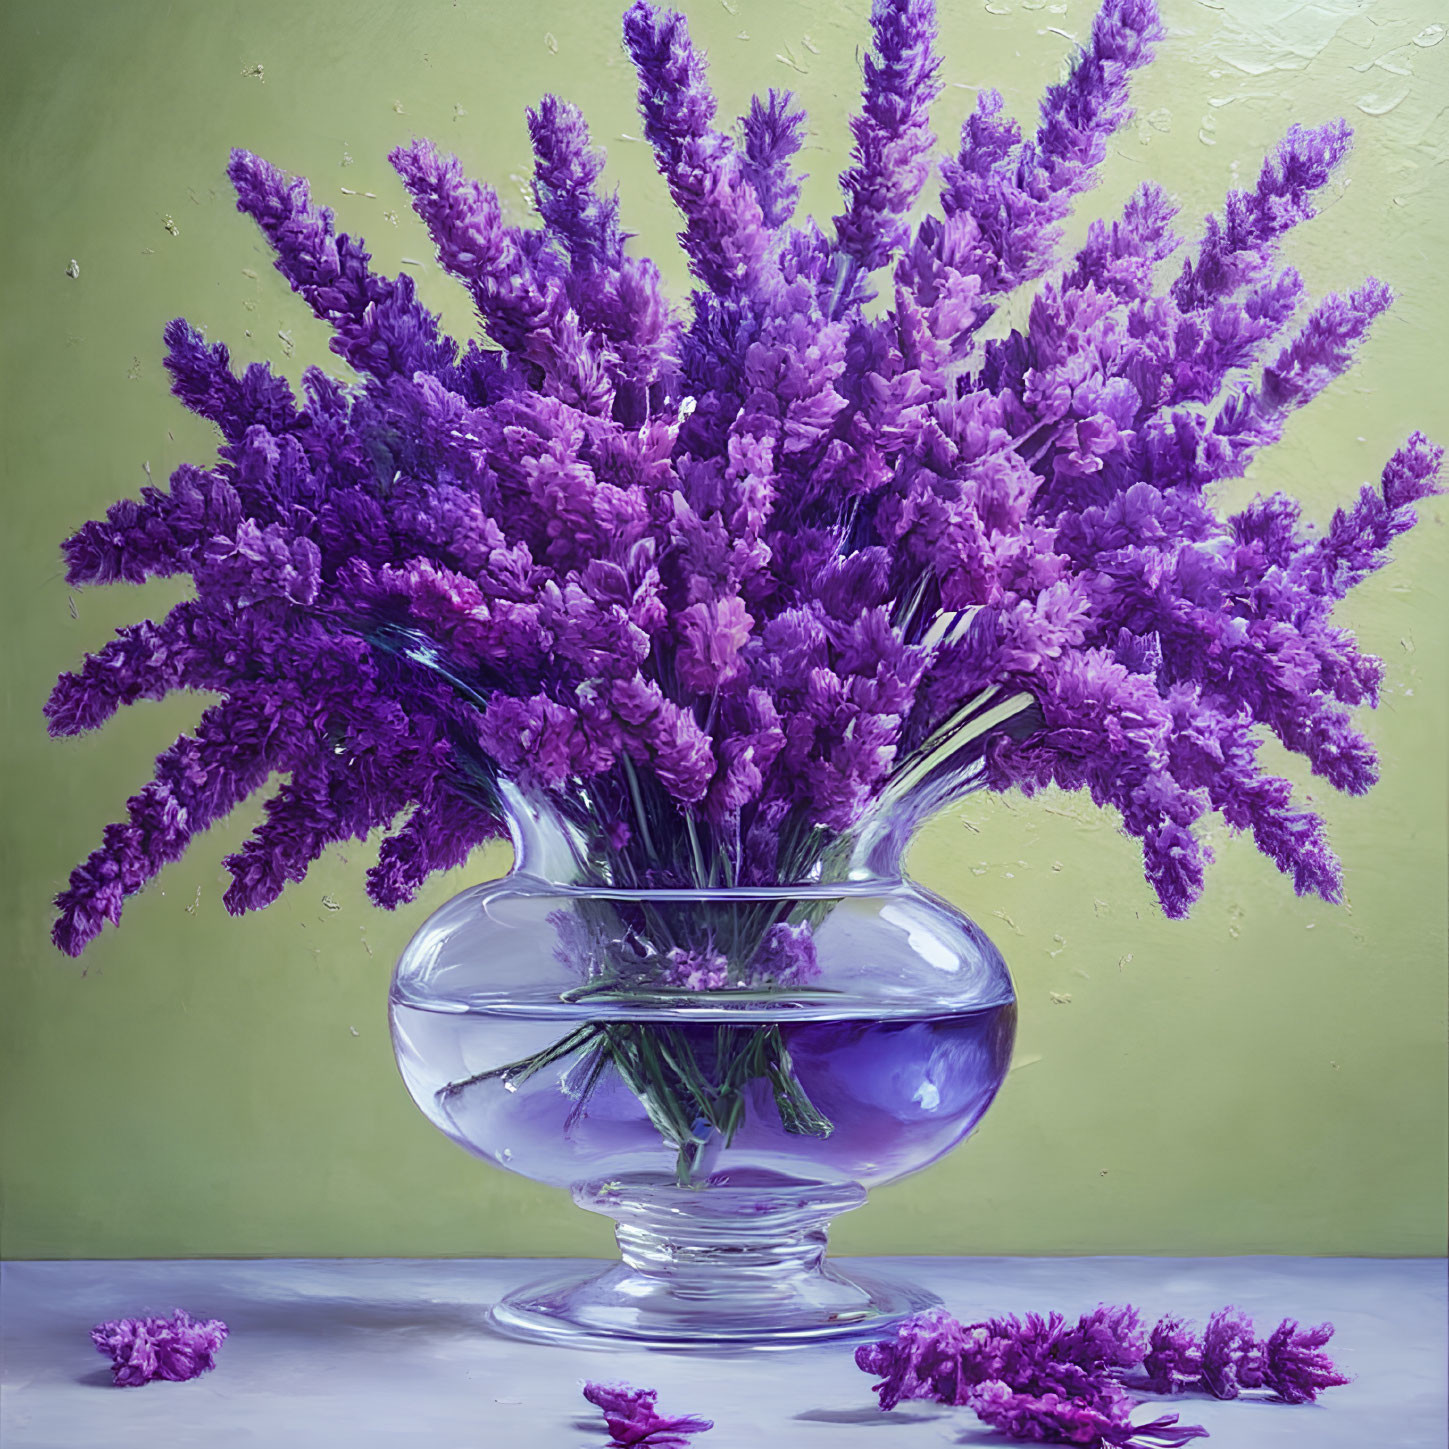 Purple Lavender Flowers in Clear Glass Vase on Green Background